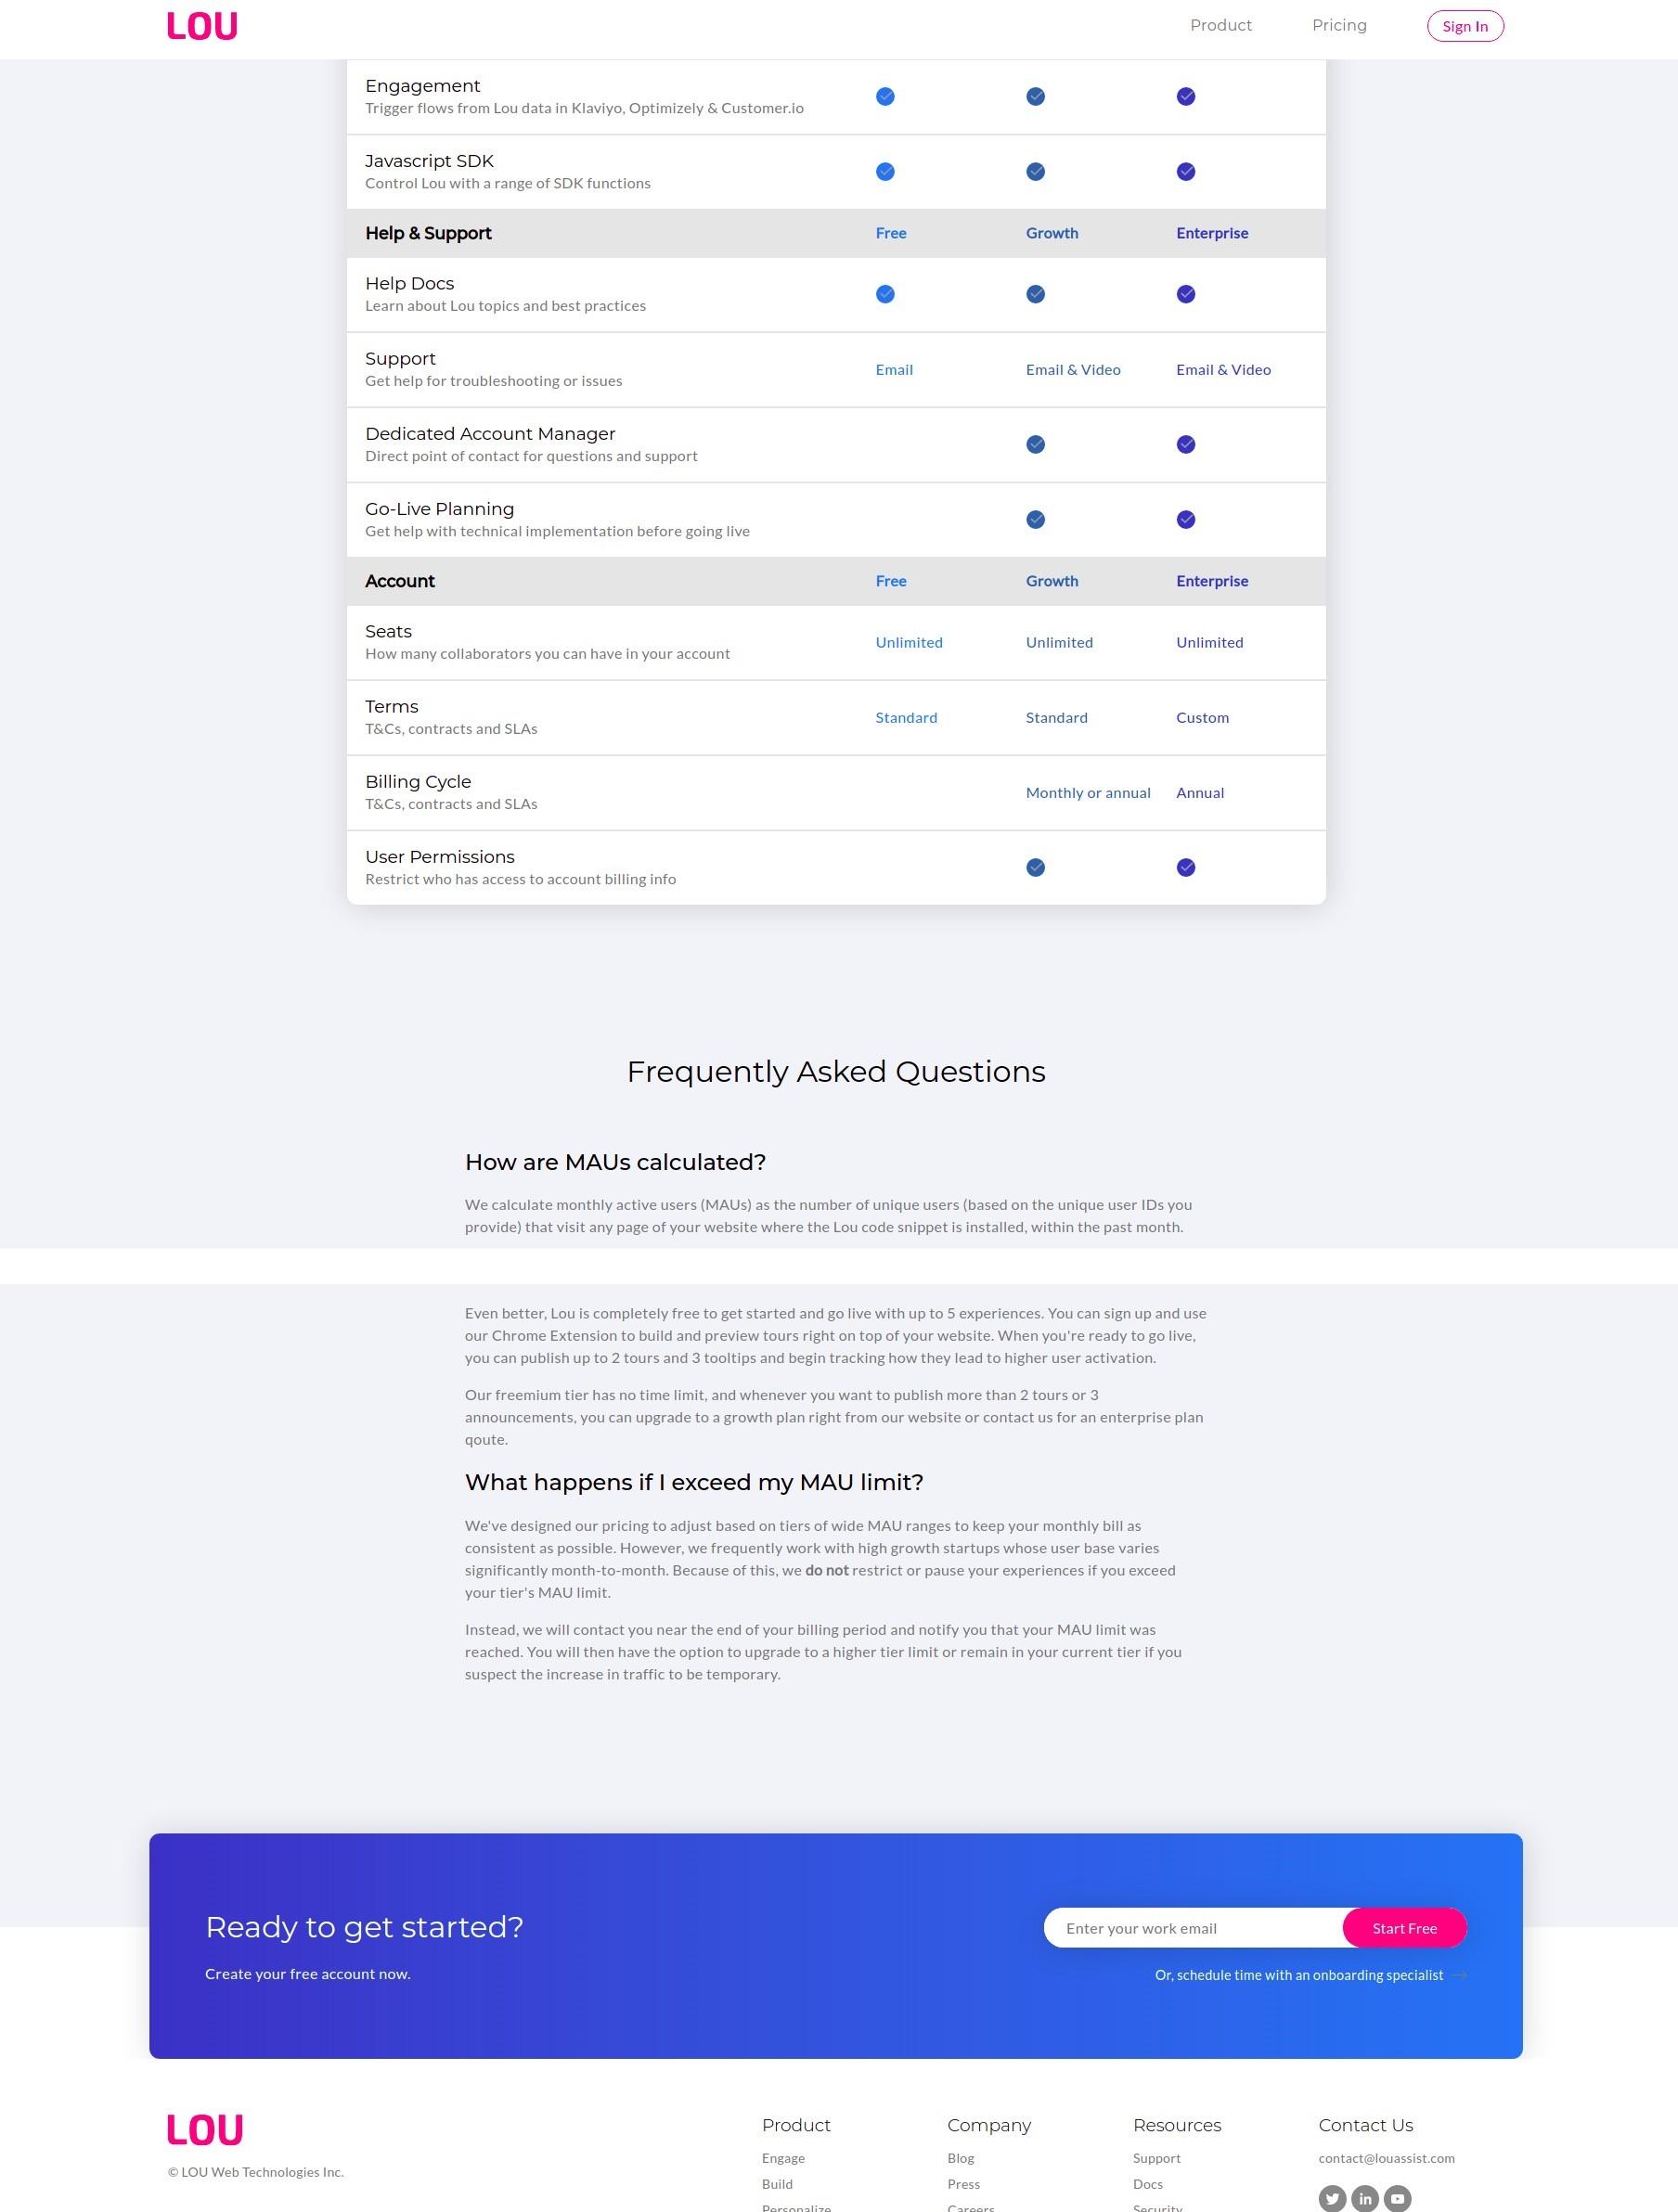 Updated Pricing Table of the Pricing Page.